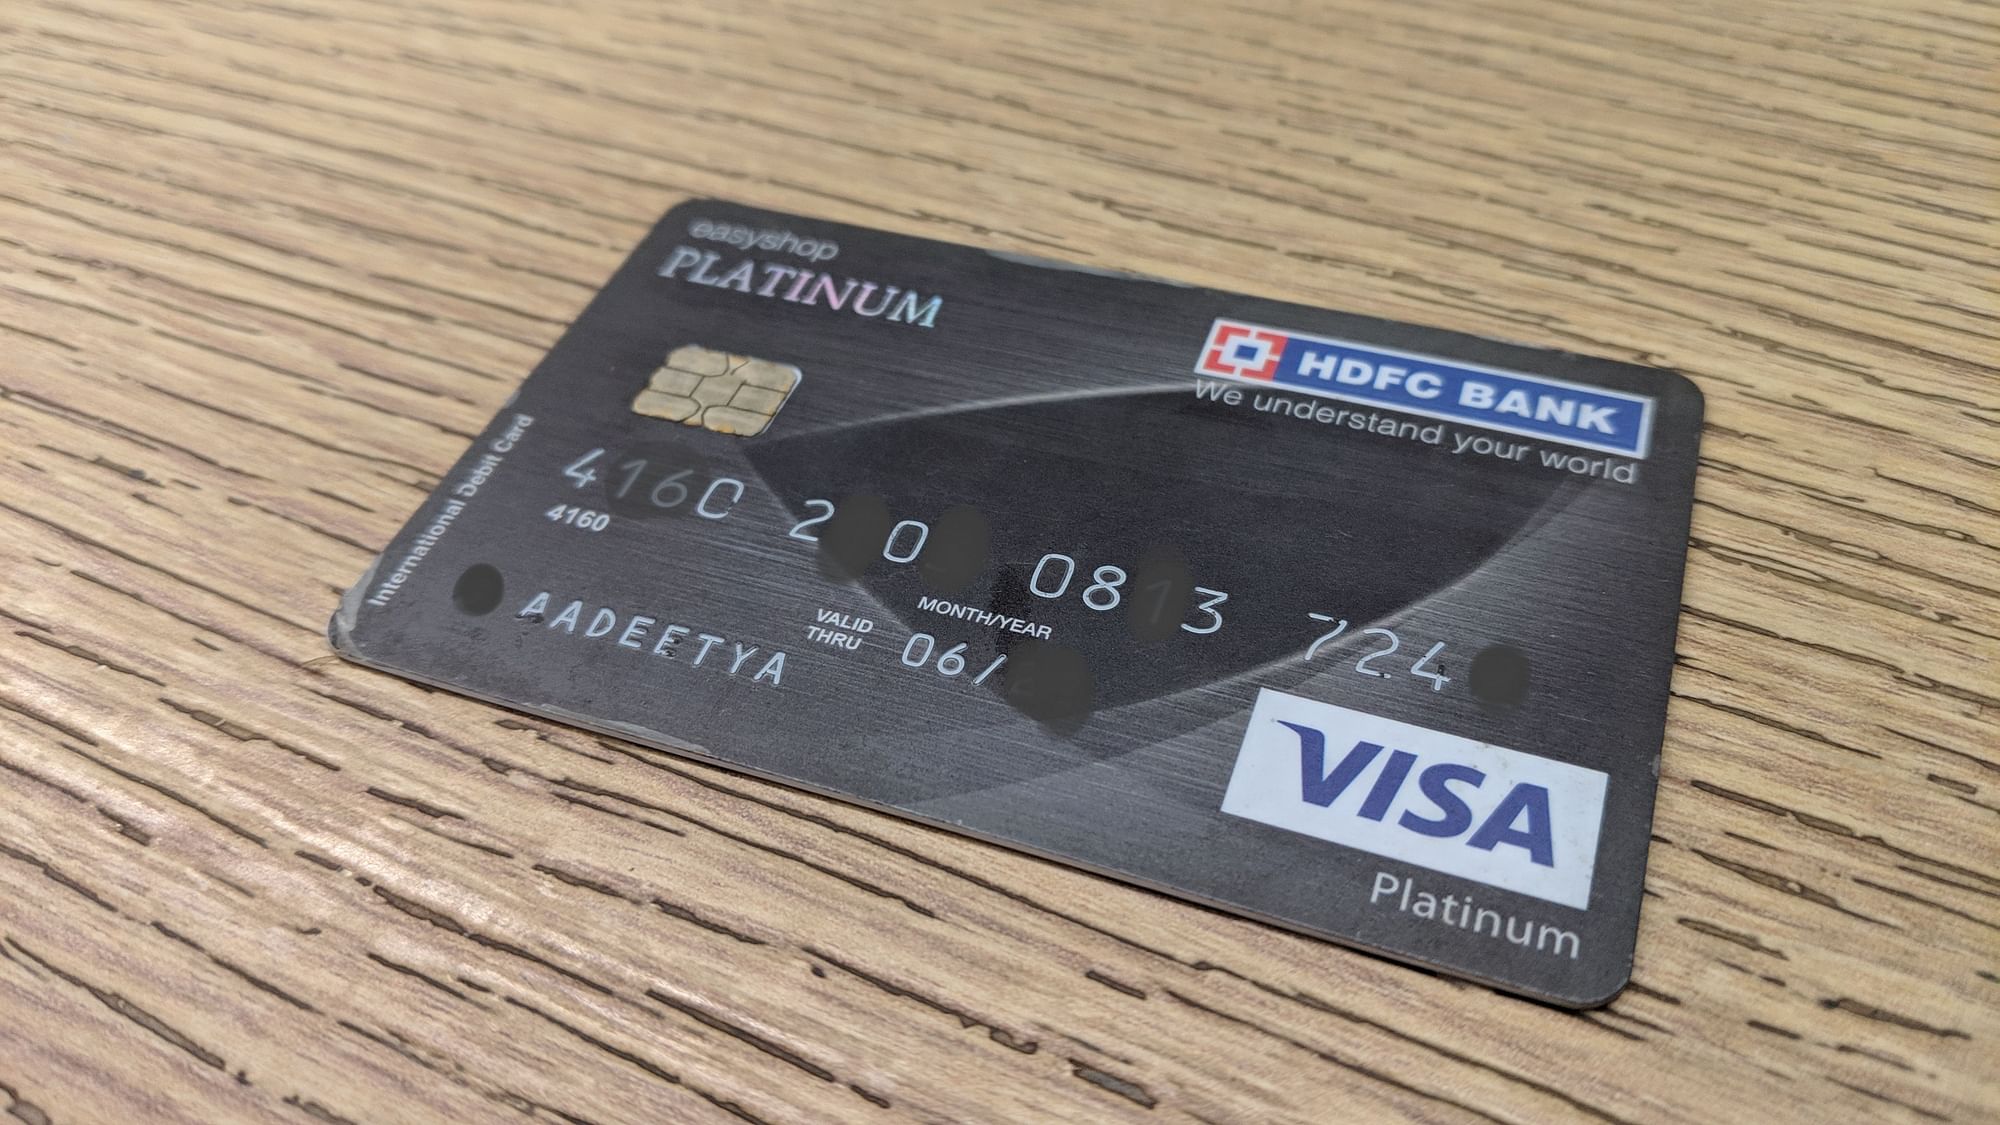 EMV chip-based payment cards will become the standard from 2019 onwards.